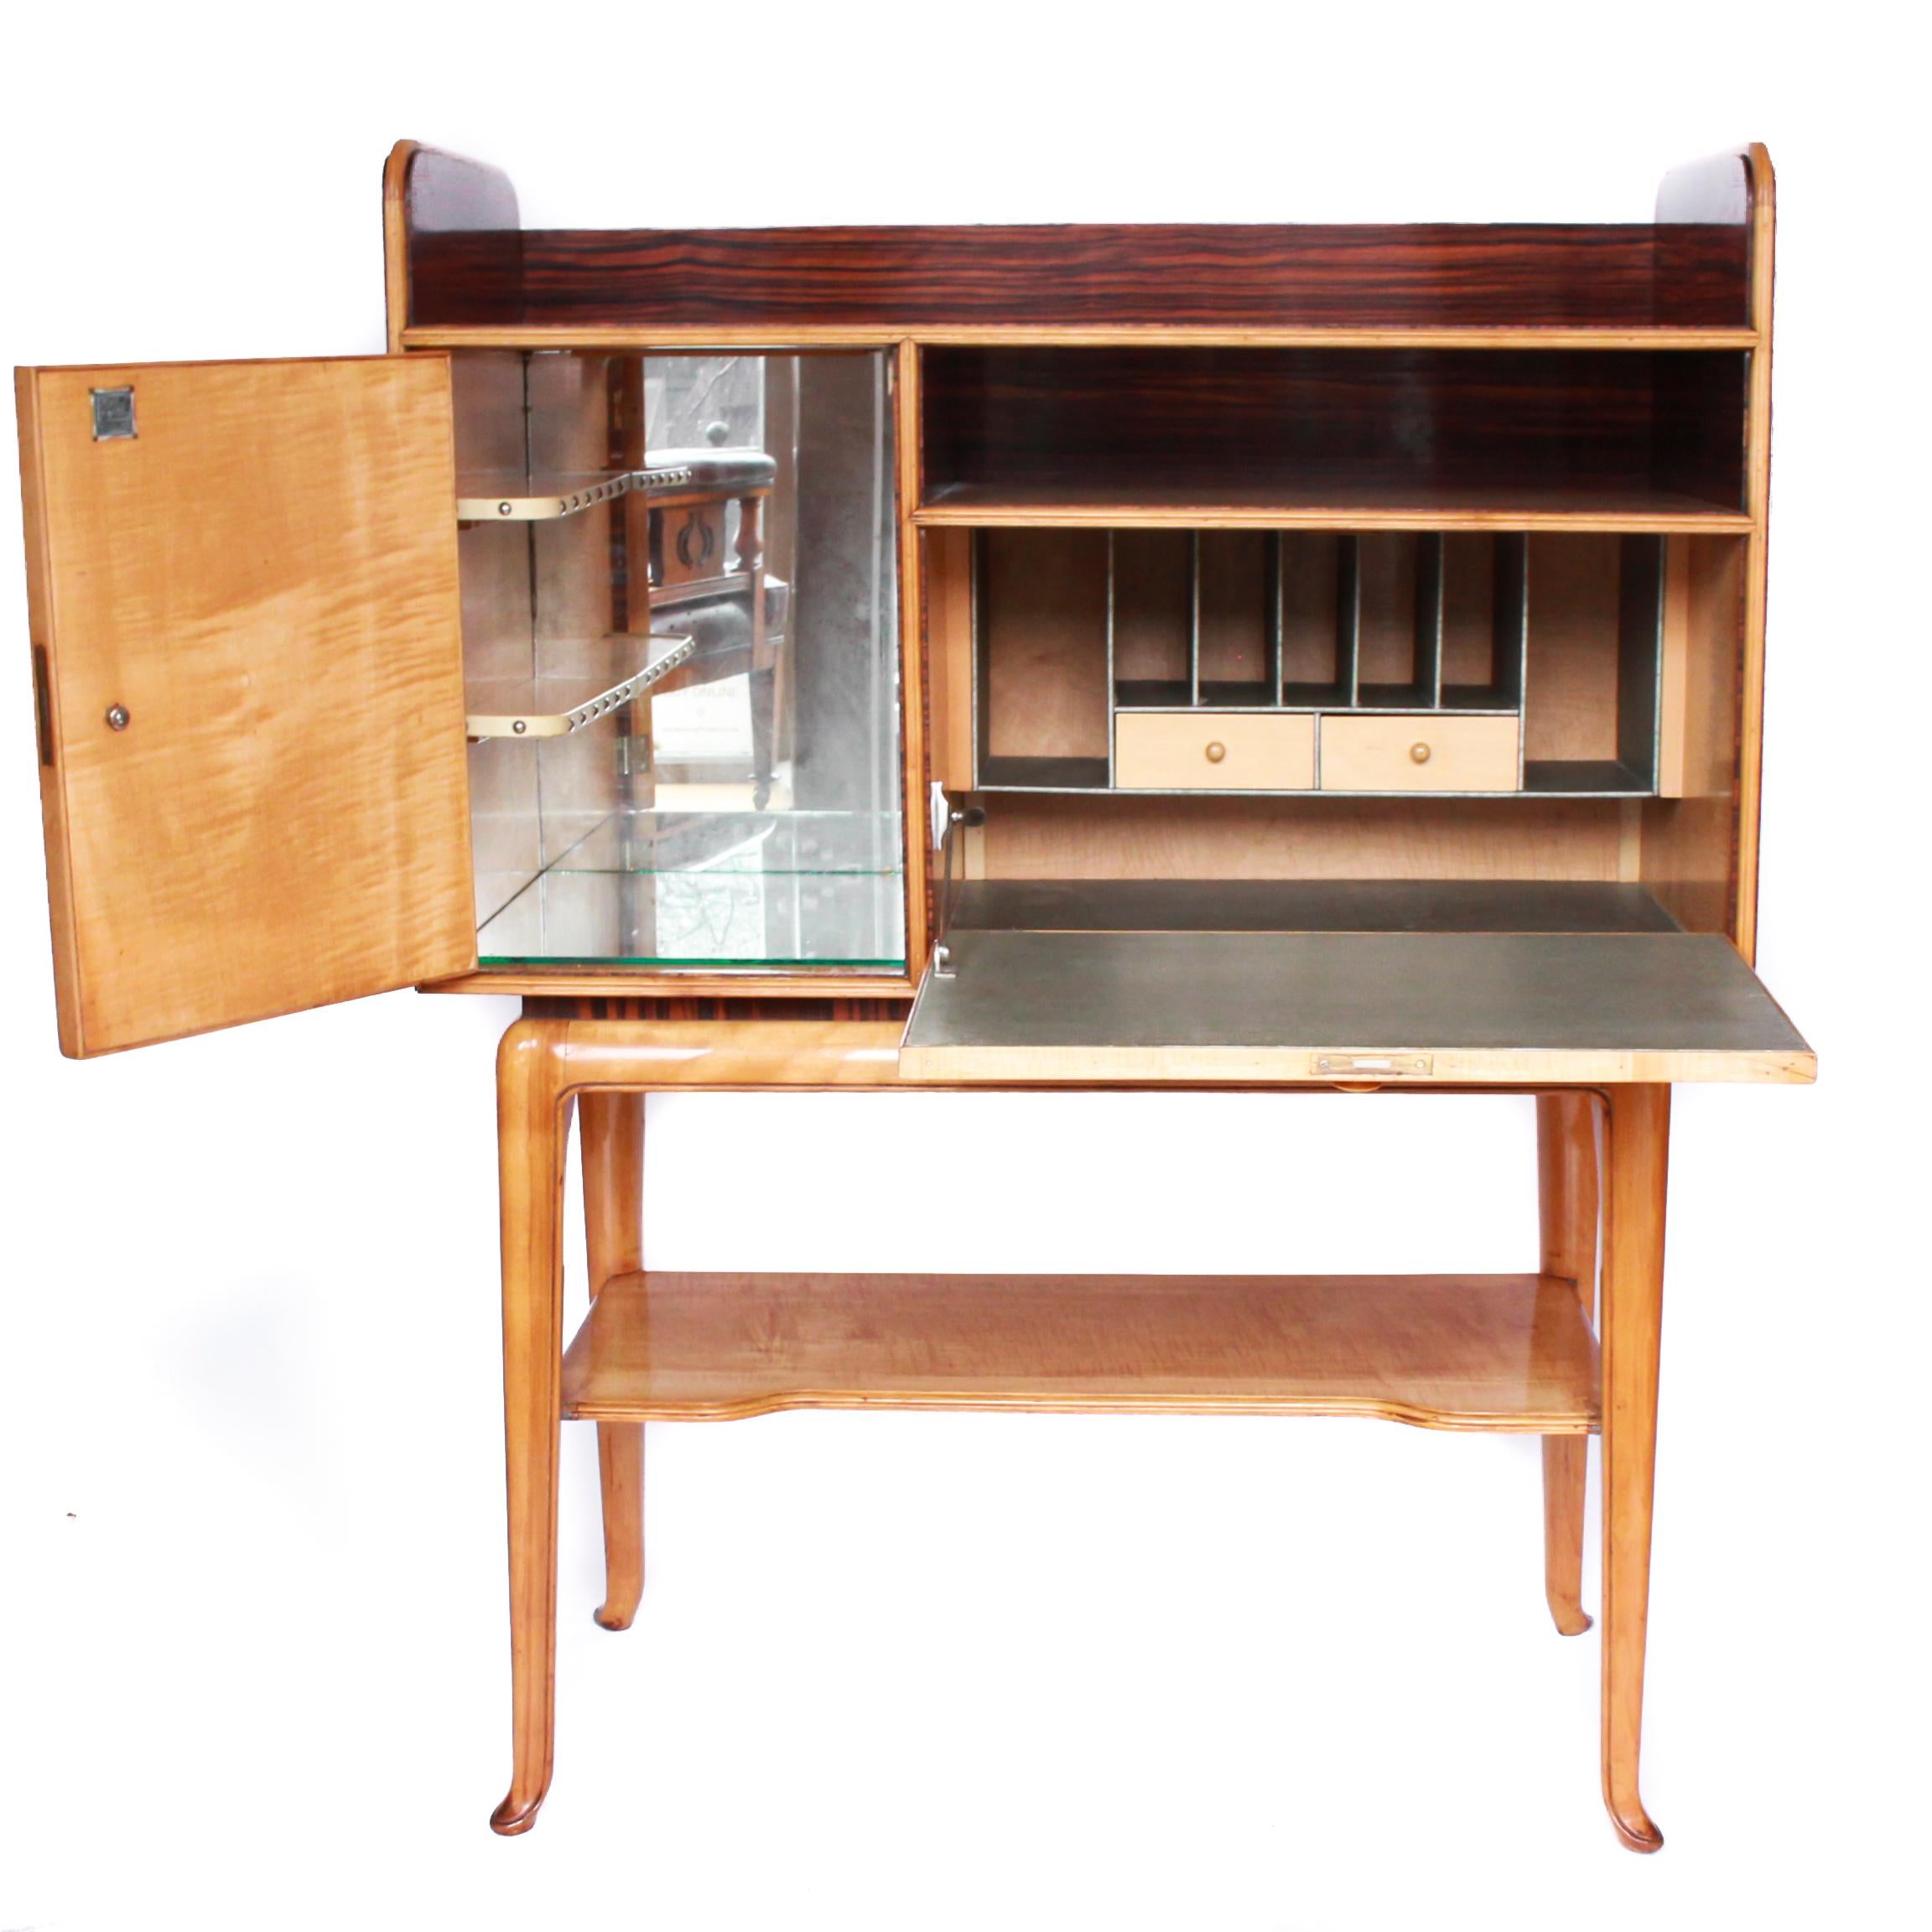 A Macassar ebony and maple bureau and cocktail cabinet designed by Laszlo Hoenig. Cocktail cupboard contains mirrored interior with two small shelves whilst the drop front bureau section consists of two small drawers in the middle of other small